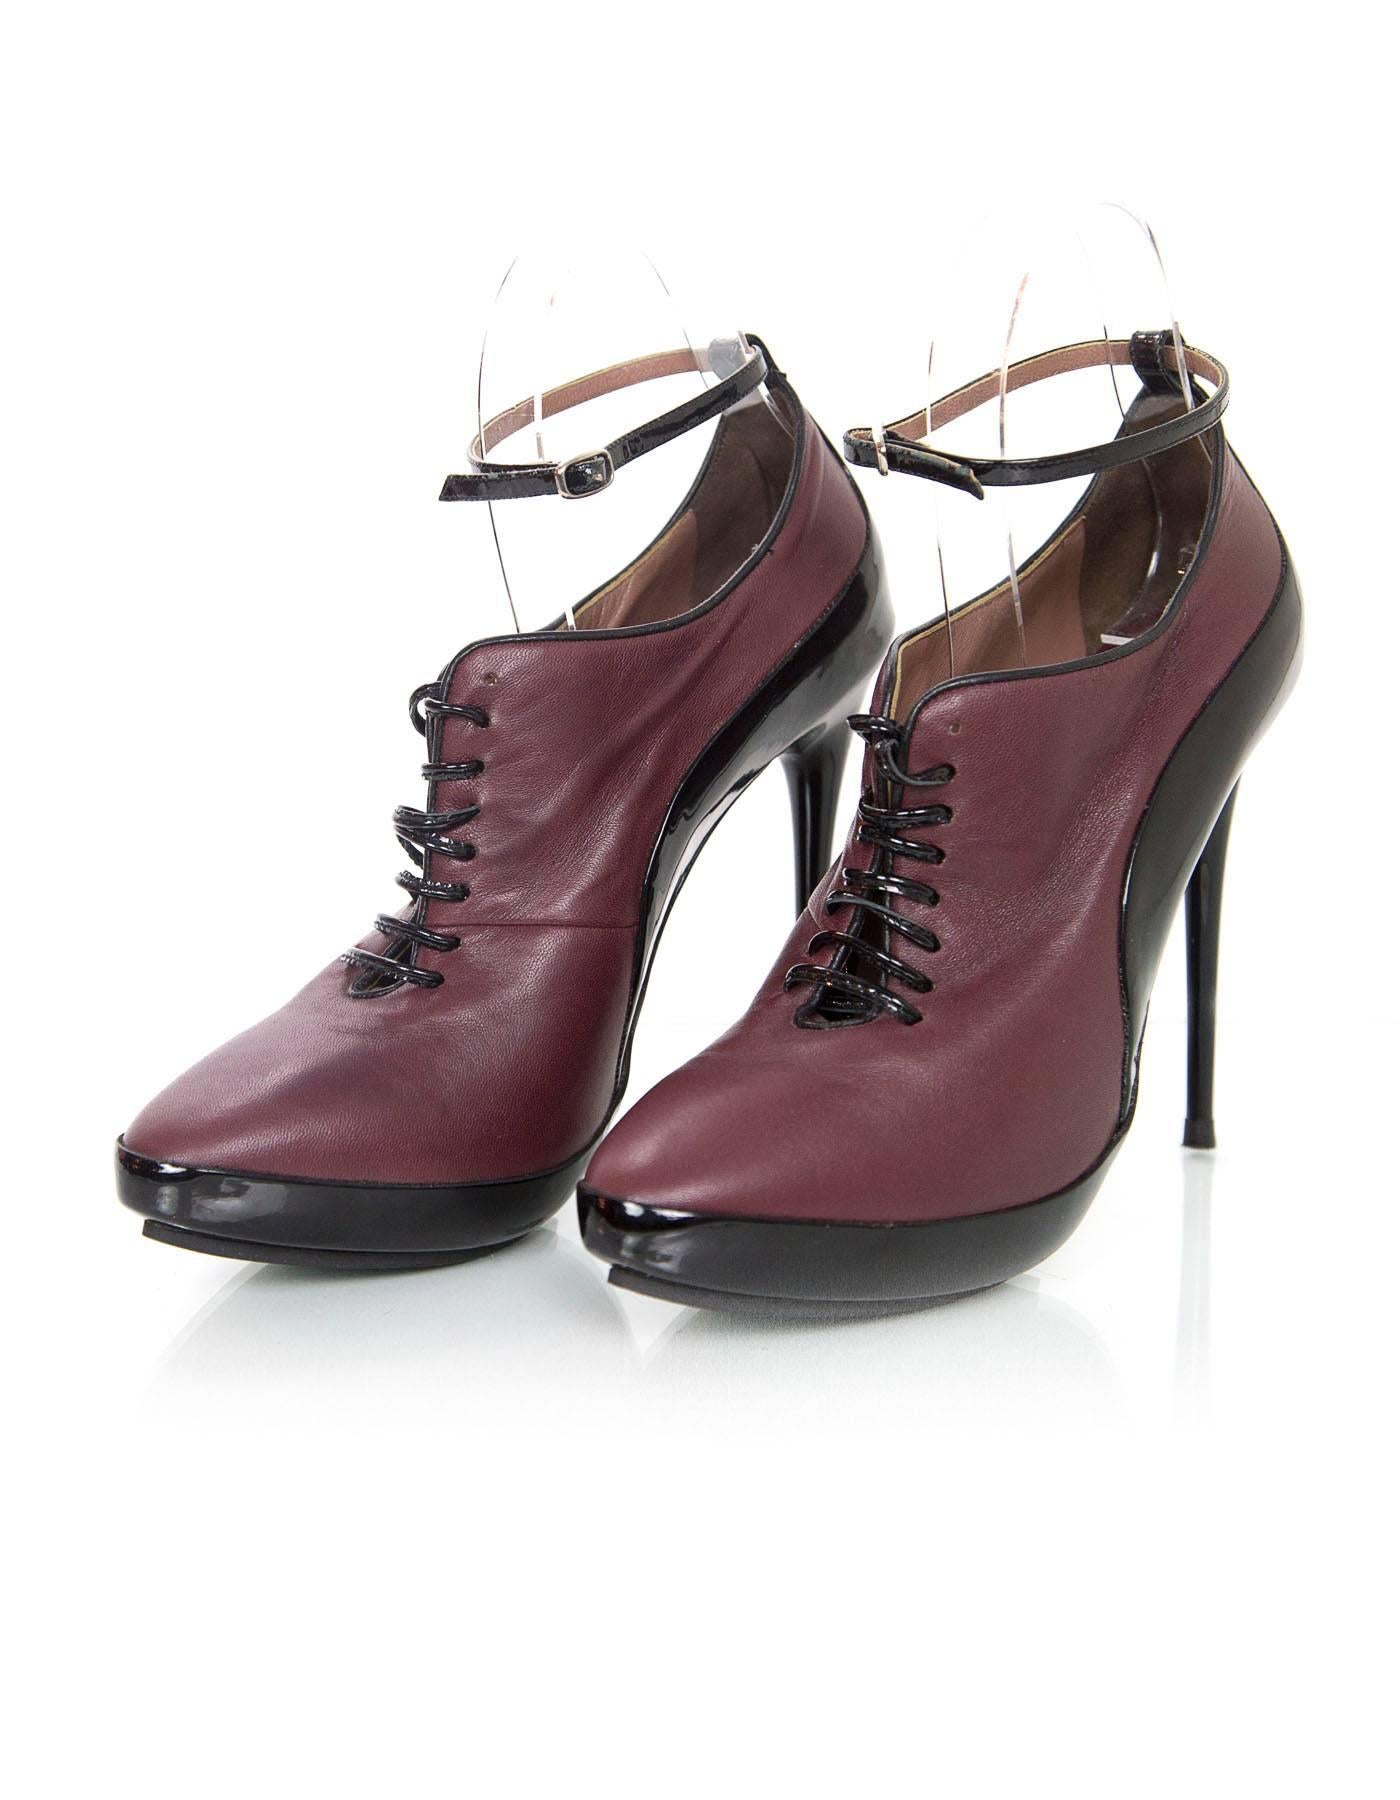 Tabitha Simmons Eggplant Leather Booties 
Features platform, patent ankle strap and patent laces

Made In: Italy
Color: Eggplant and black
Materials: Leather and patent leather
Closure/Opening: Ankle strap with buckle closure and lace up
Sole Stamp: